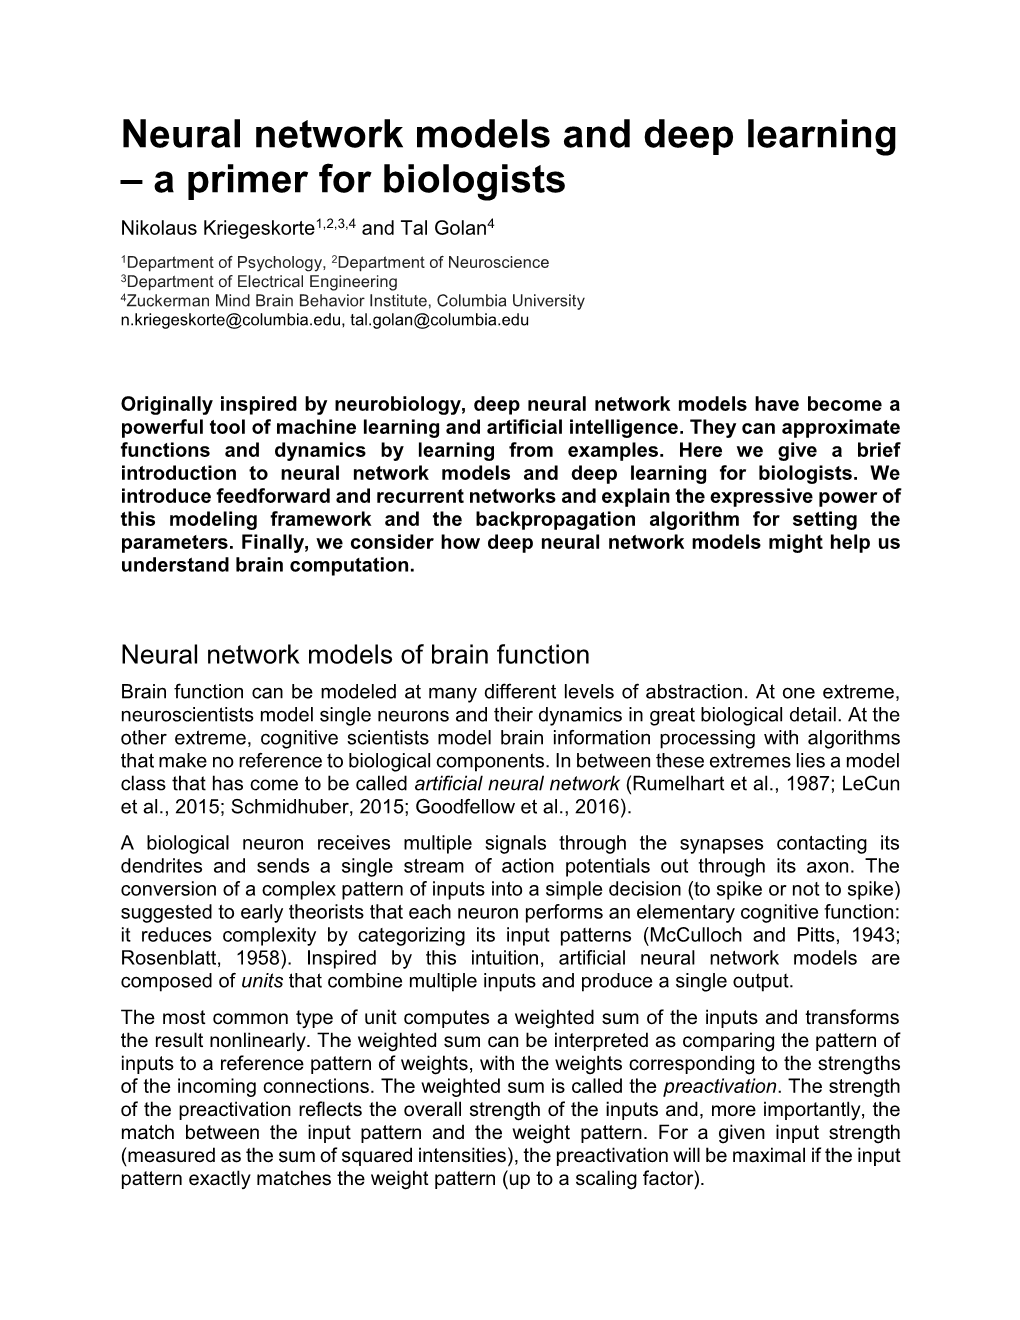 Neural Network Models and Deep Learning – a Primer for Biologists